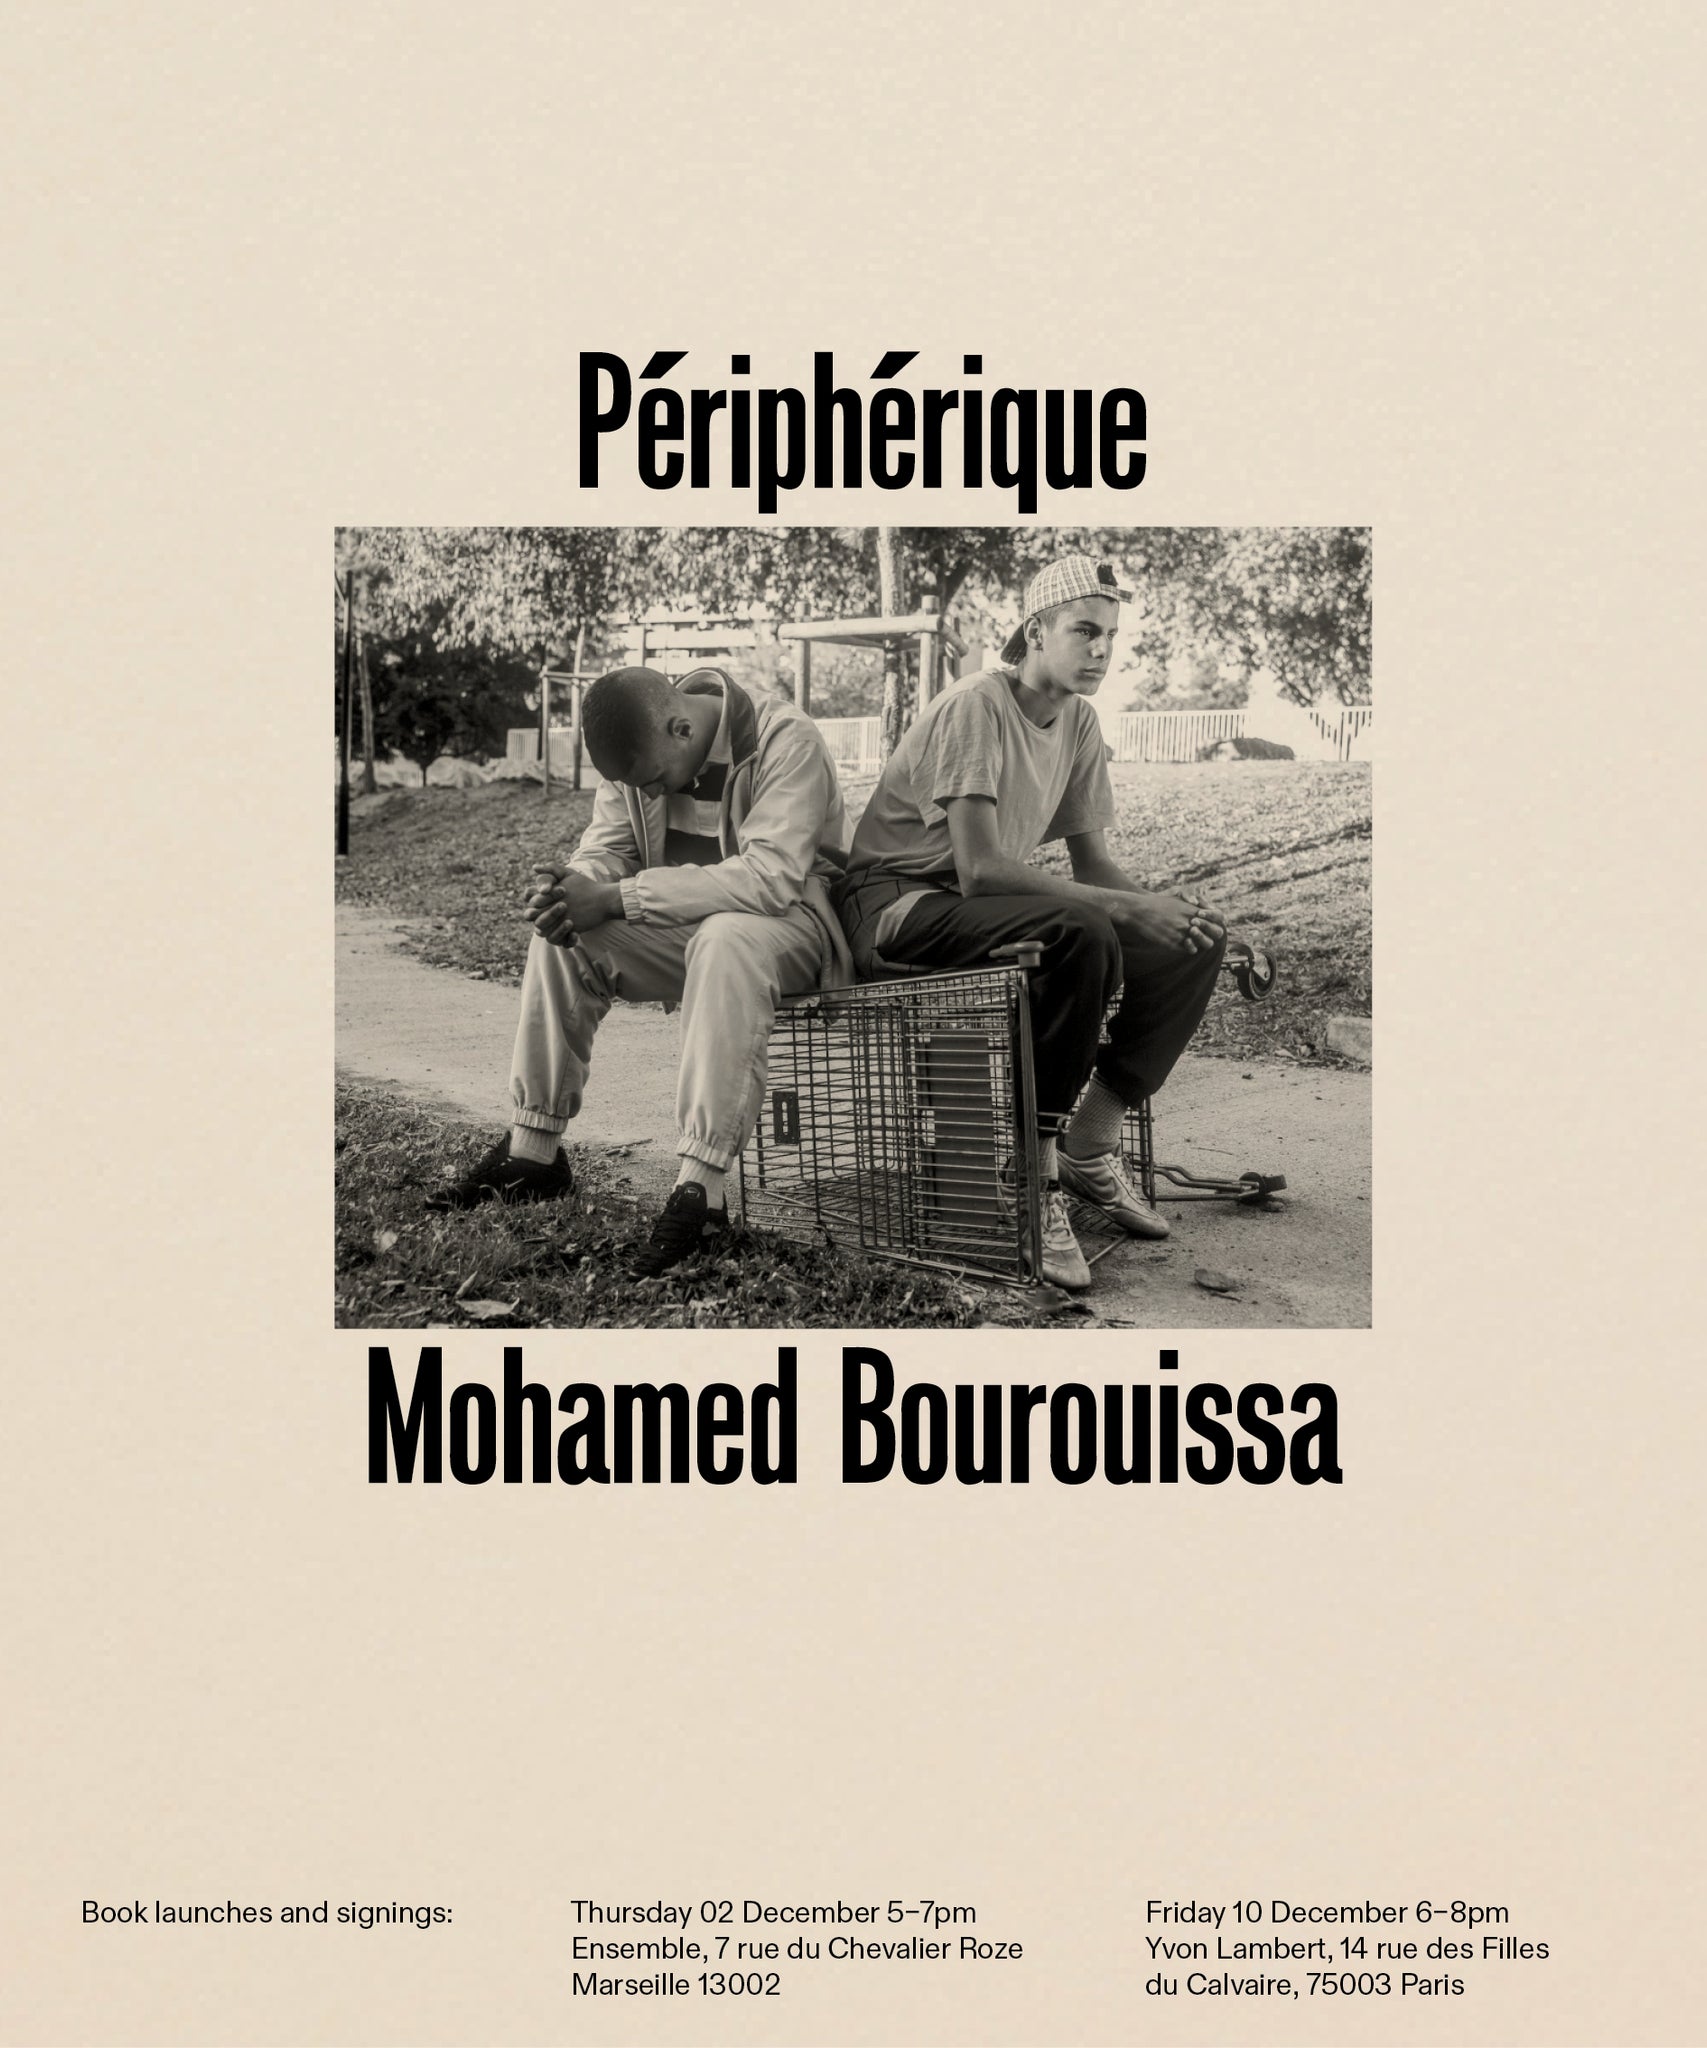 Mohamed Bourouissa book launches in Marseille and Paris